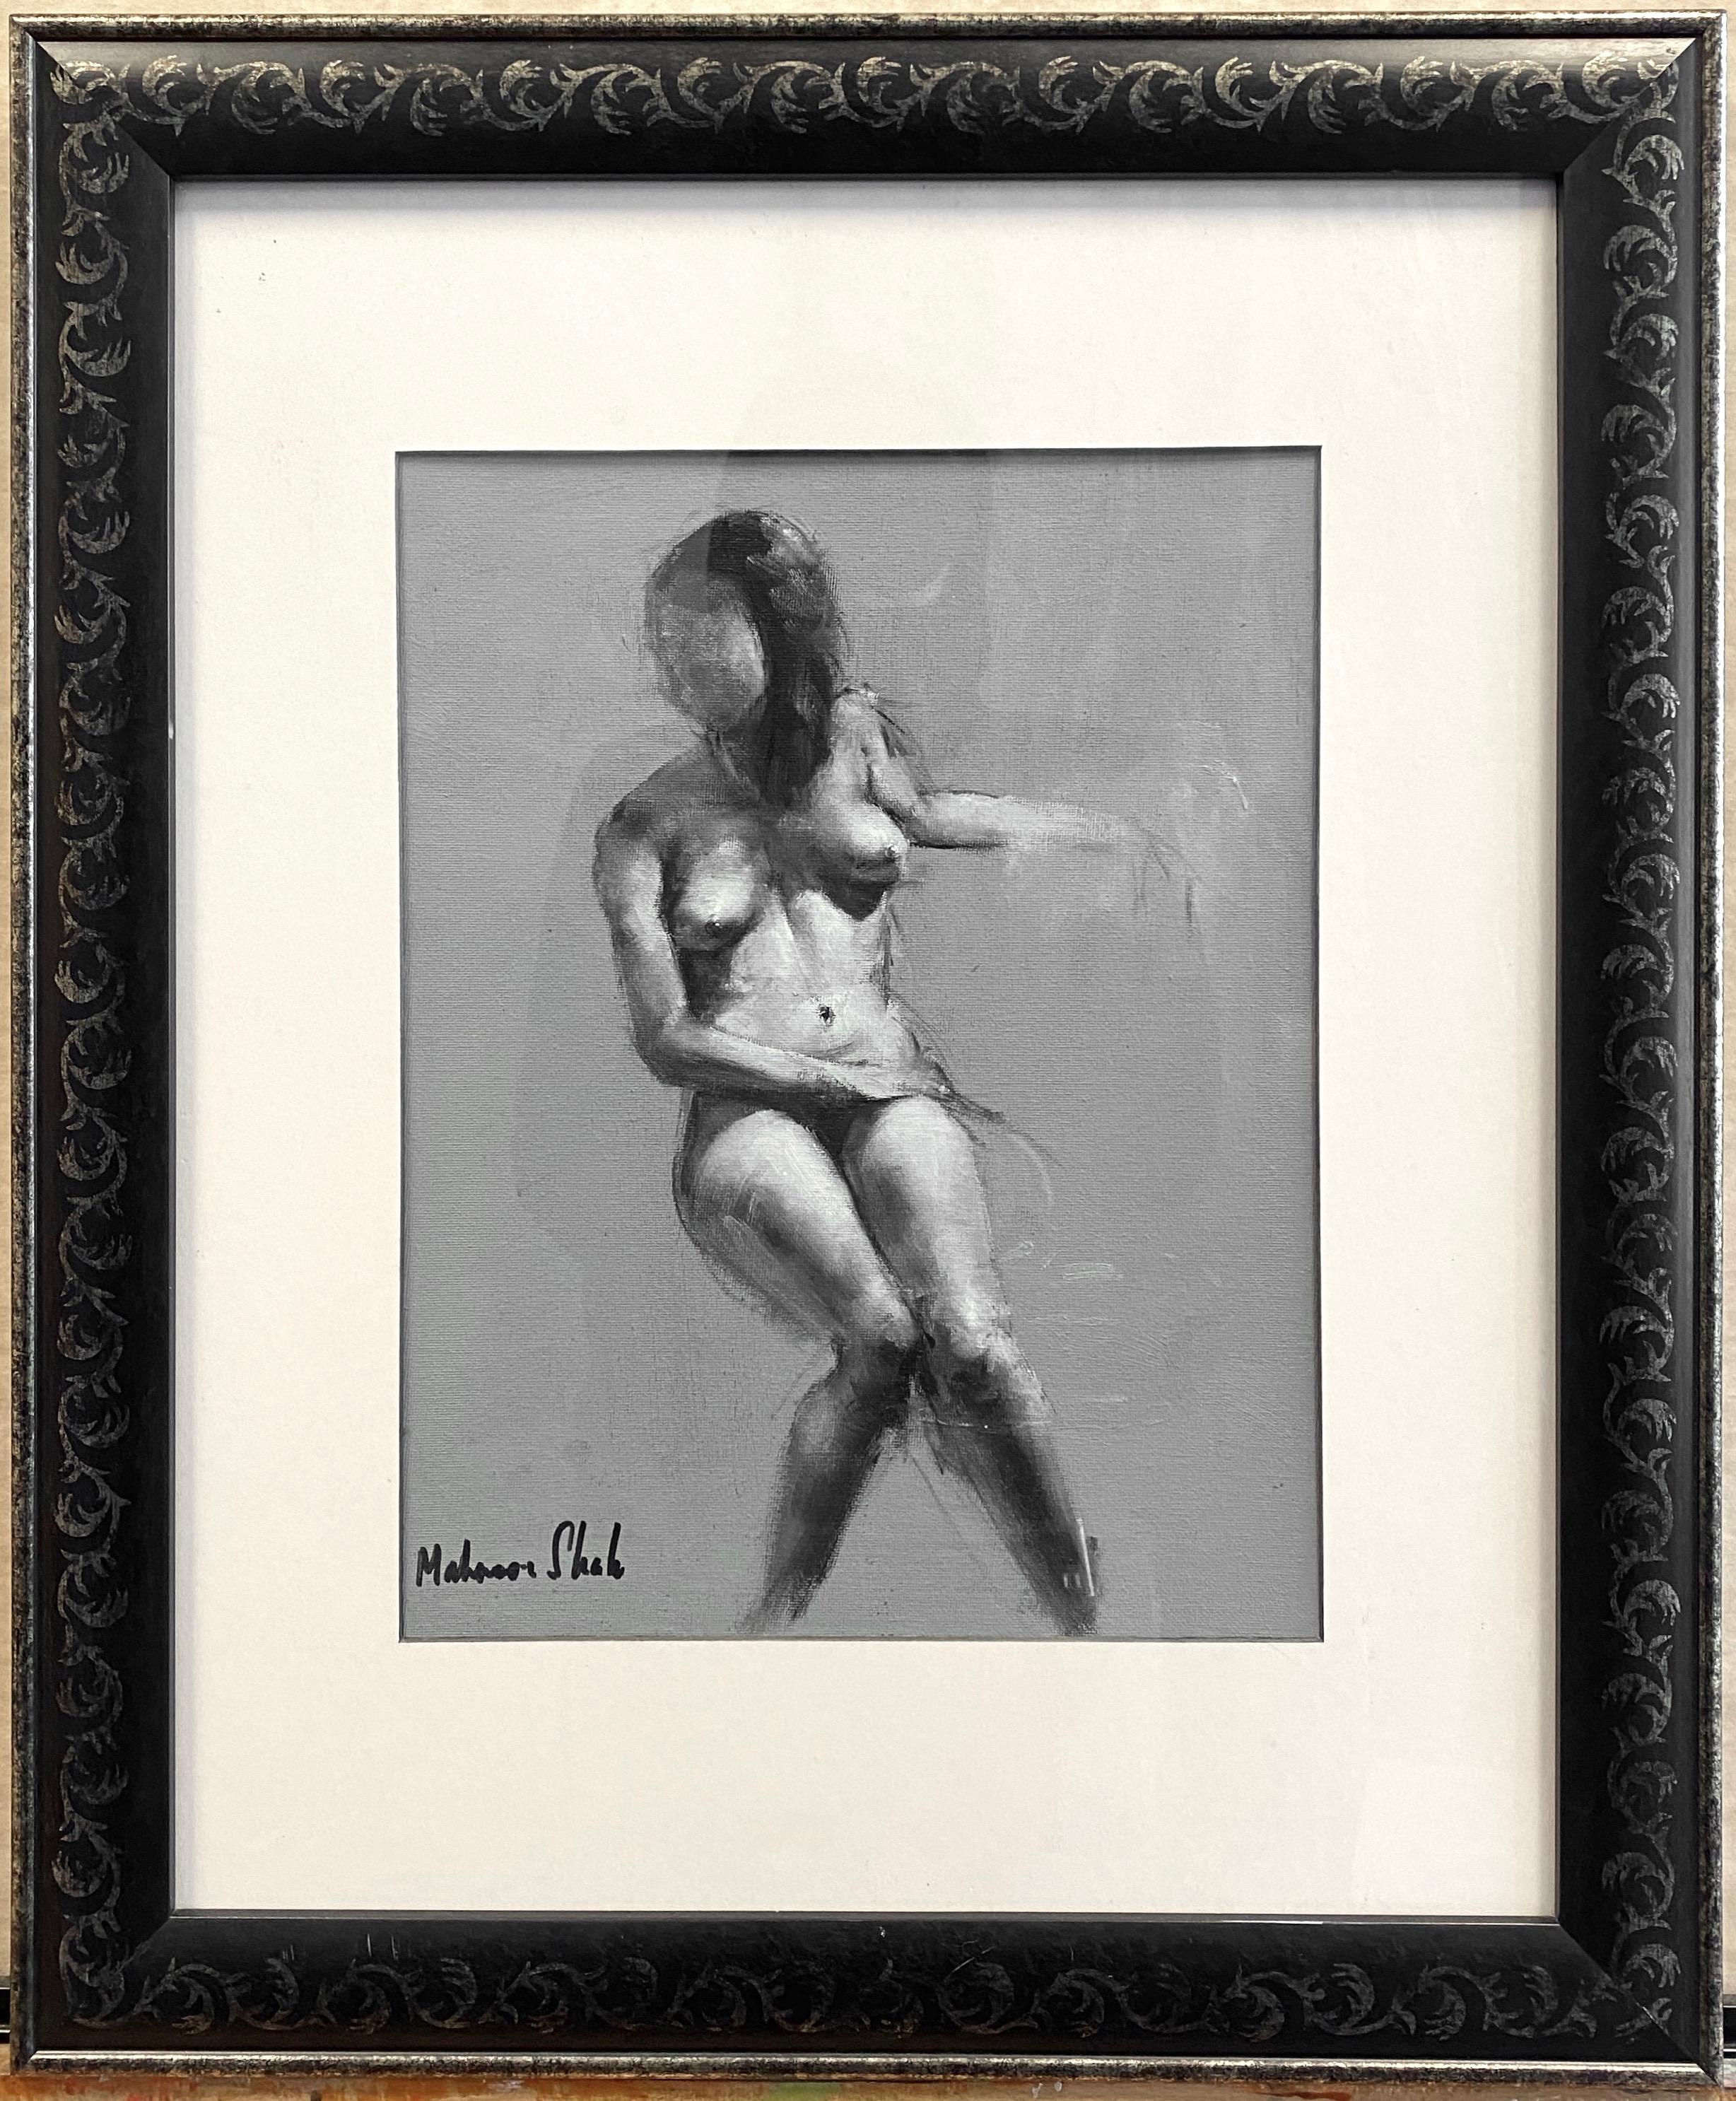 An early 2010s untitled nude figure study impressionist painting on art board by well-known Pakistani artist Mahnoor Shah.

Sensitively depicted female figure in a casual seated pose, rendered in shades of grey against a solid light grey